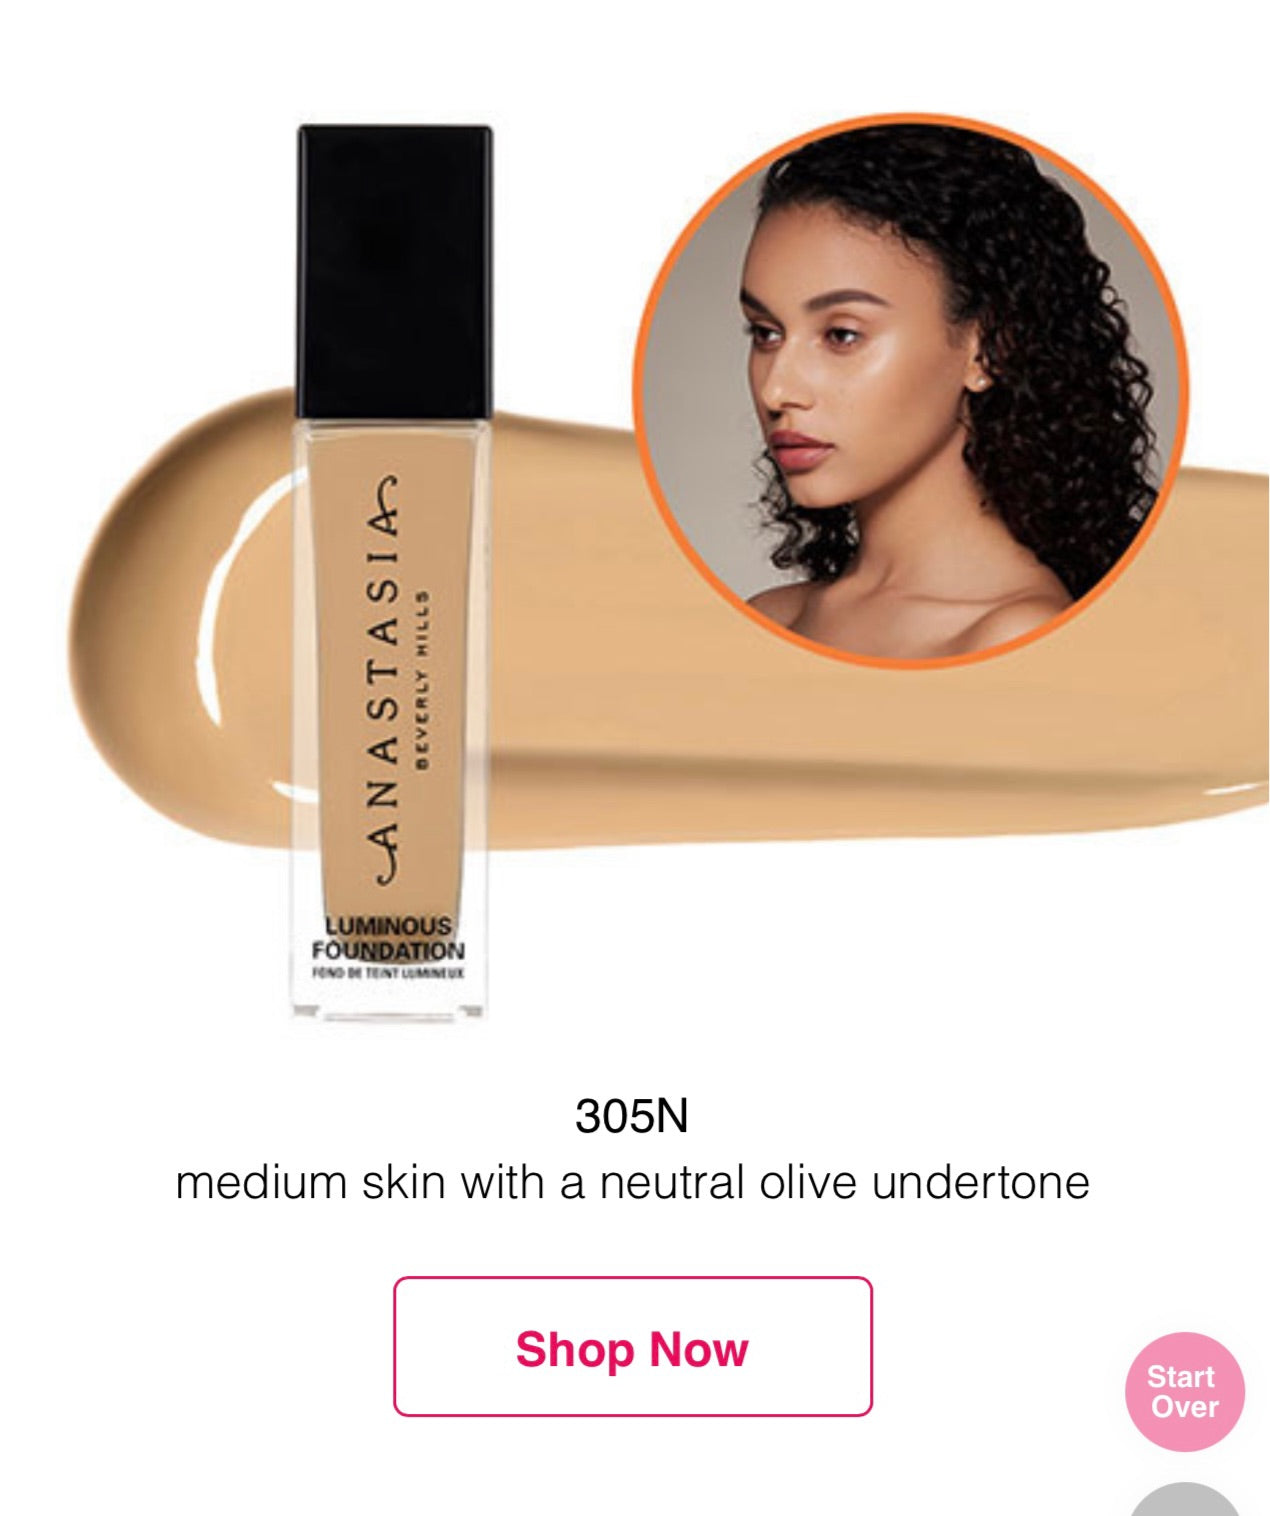 anastasia beverly hills luminous foundation 305N – Le coin des filles